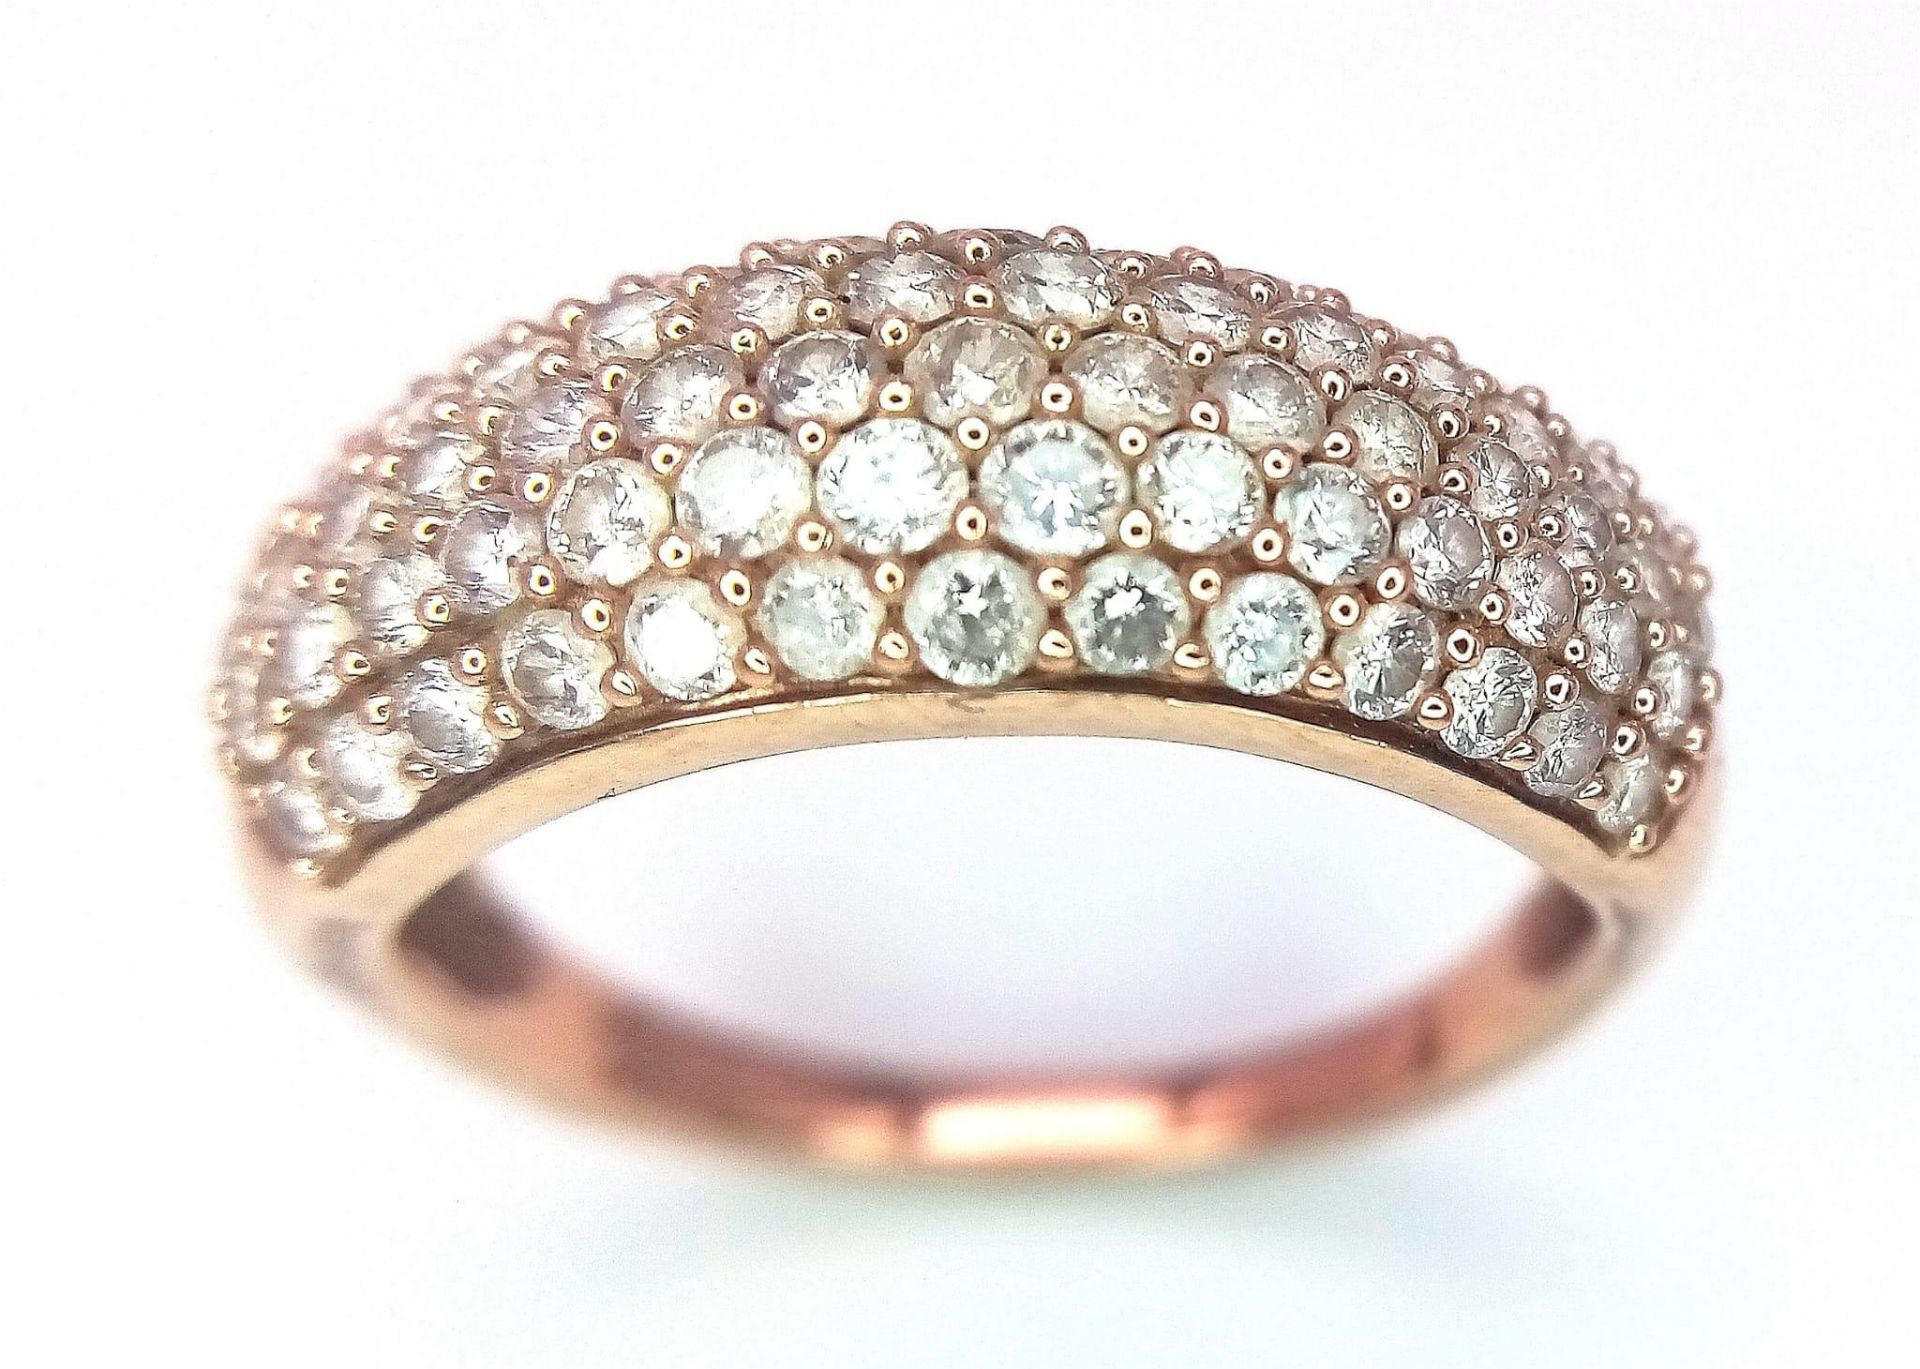 A 9K Rose Gold Diamond Encrusted Ring. Five rows of 70 small cut round diamonds. Size N. 3.2g - Bild 2 aus 6